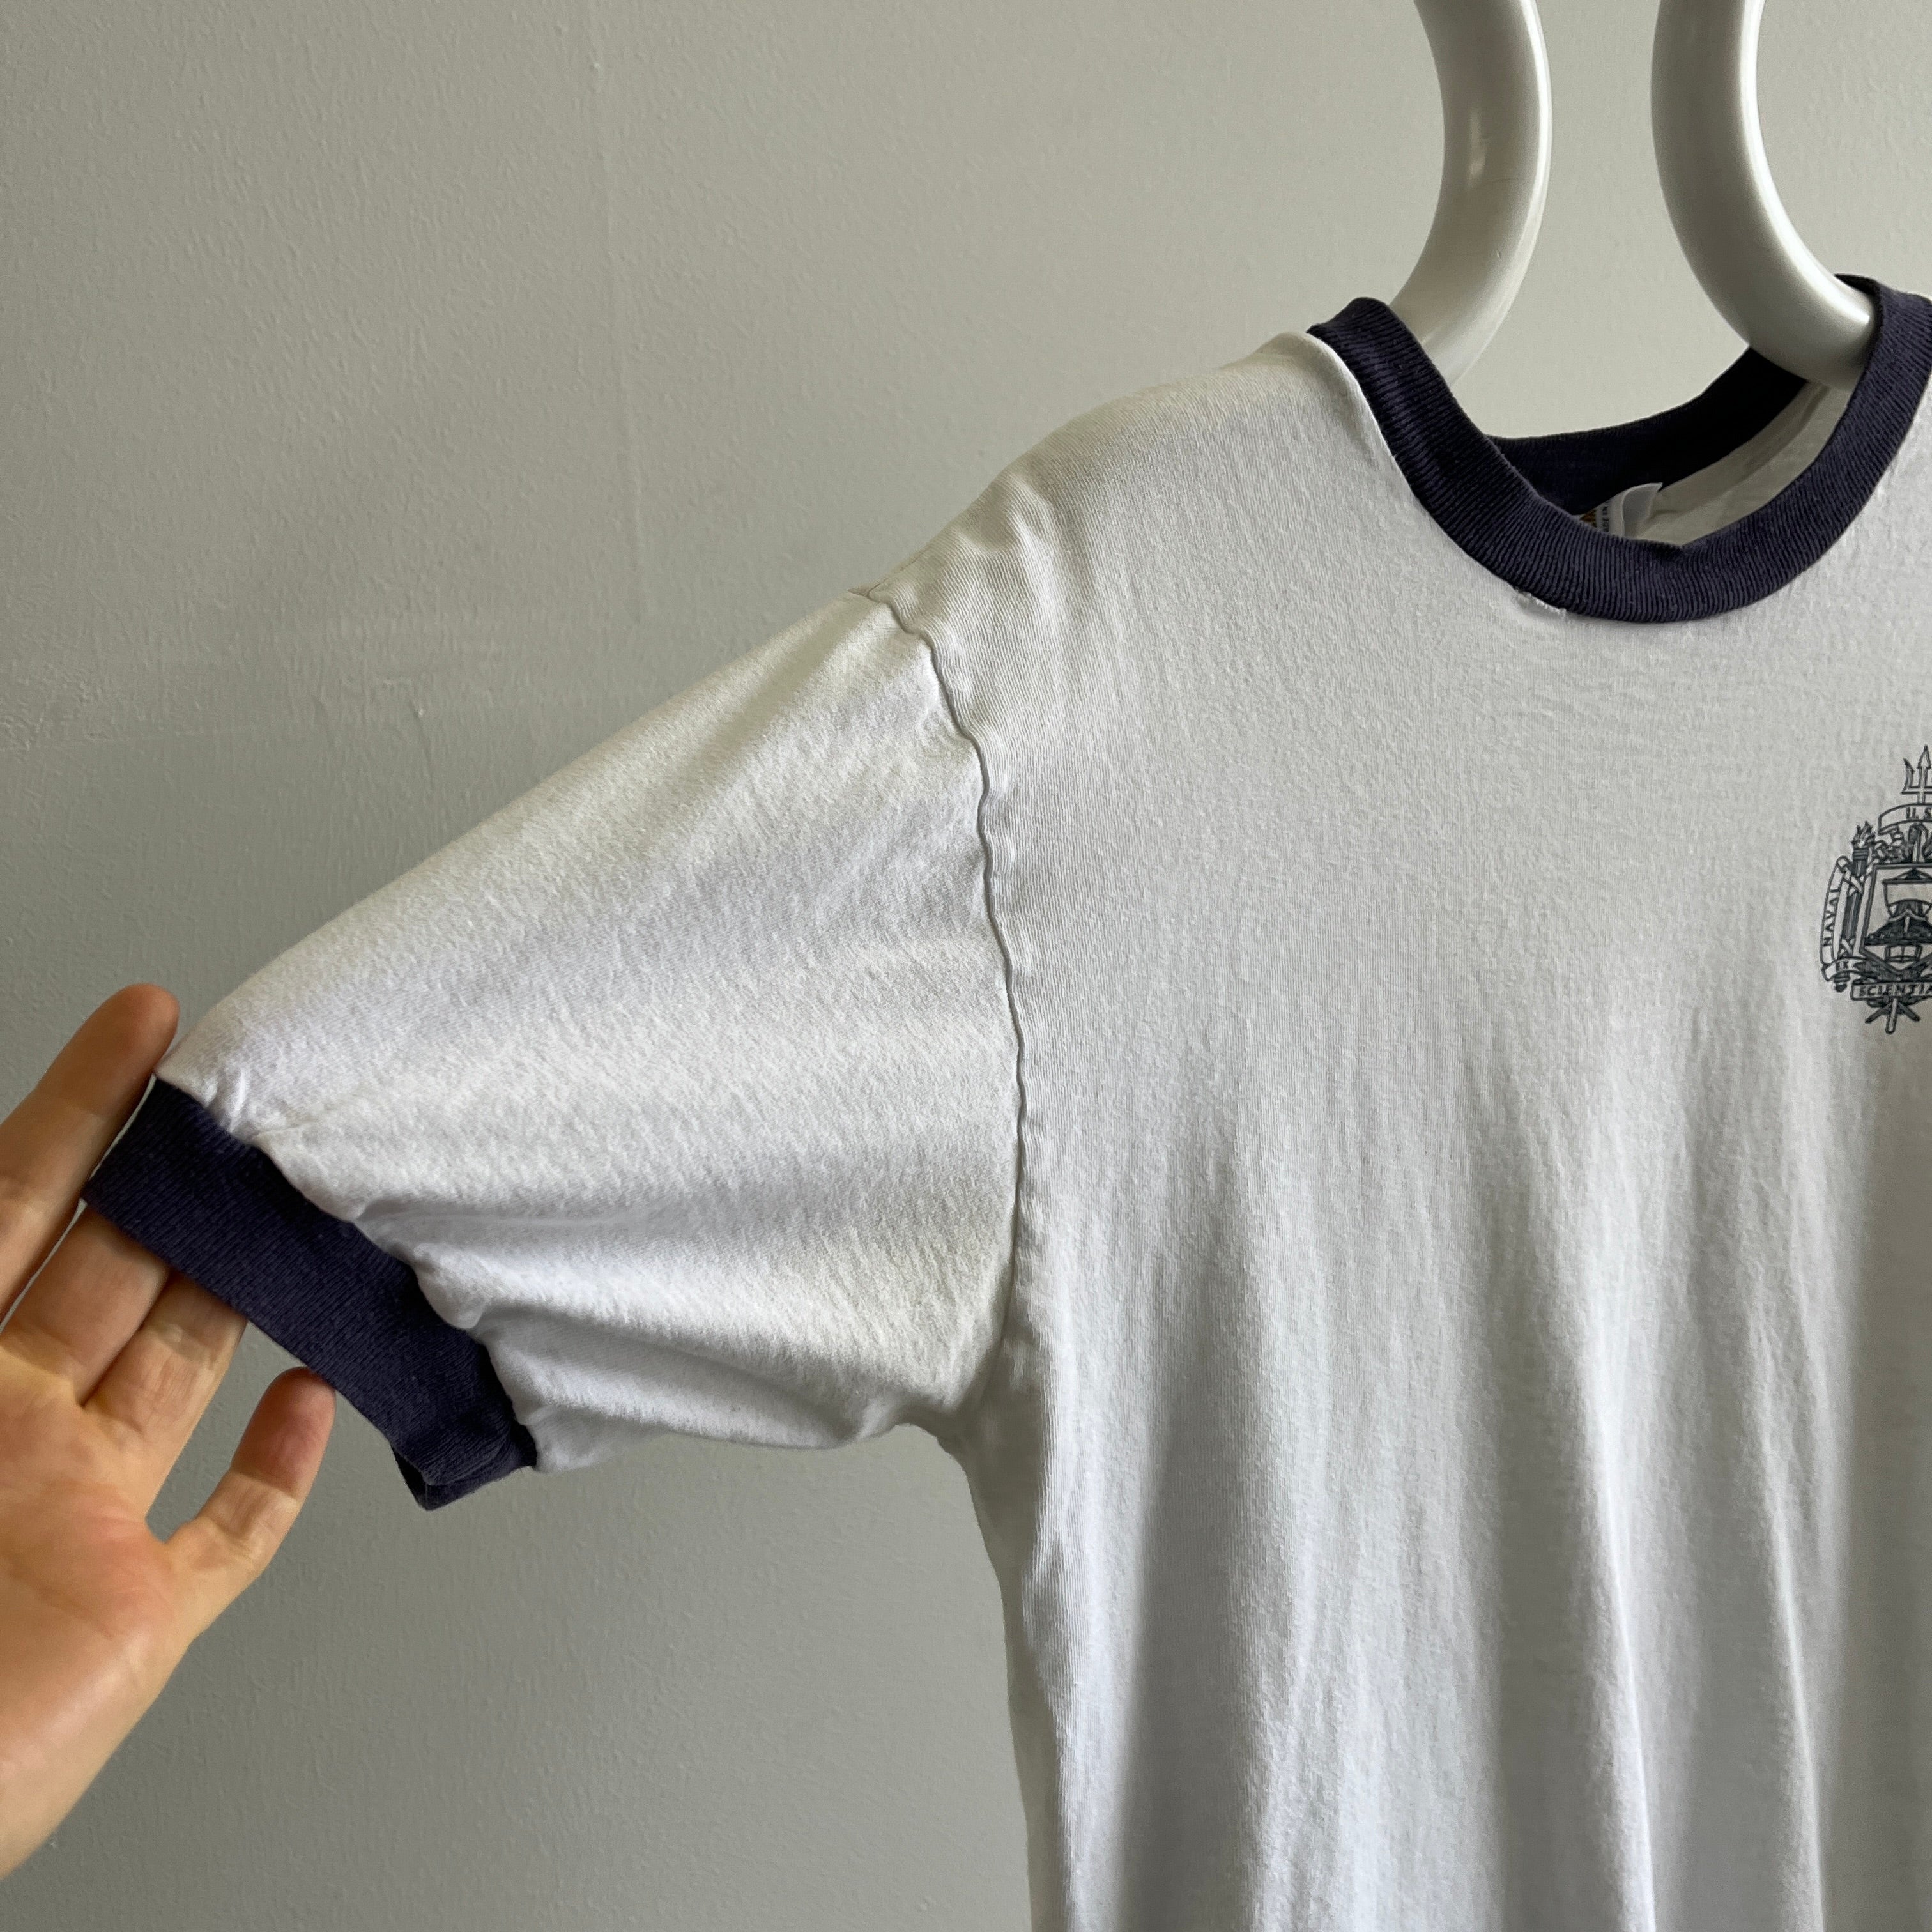 GG 1970/80s US NAVAL ACADEMY Cotton Ring T-Shirt